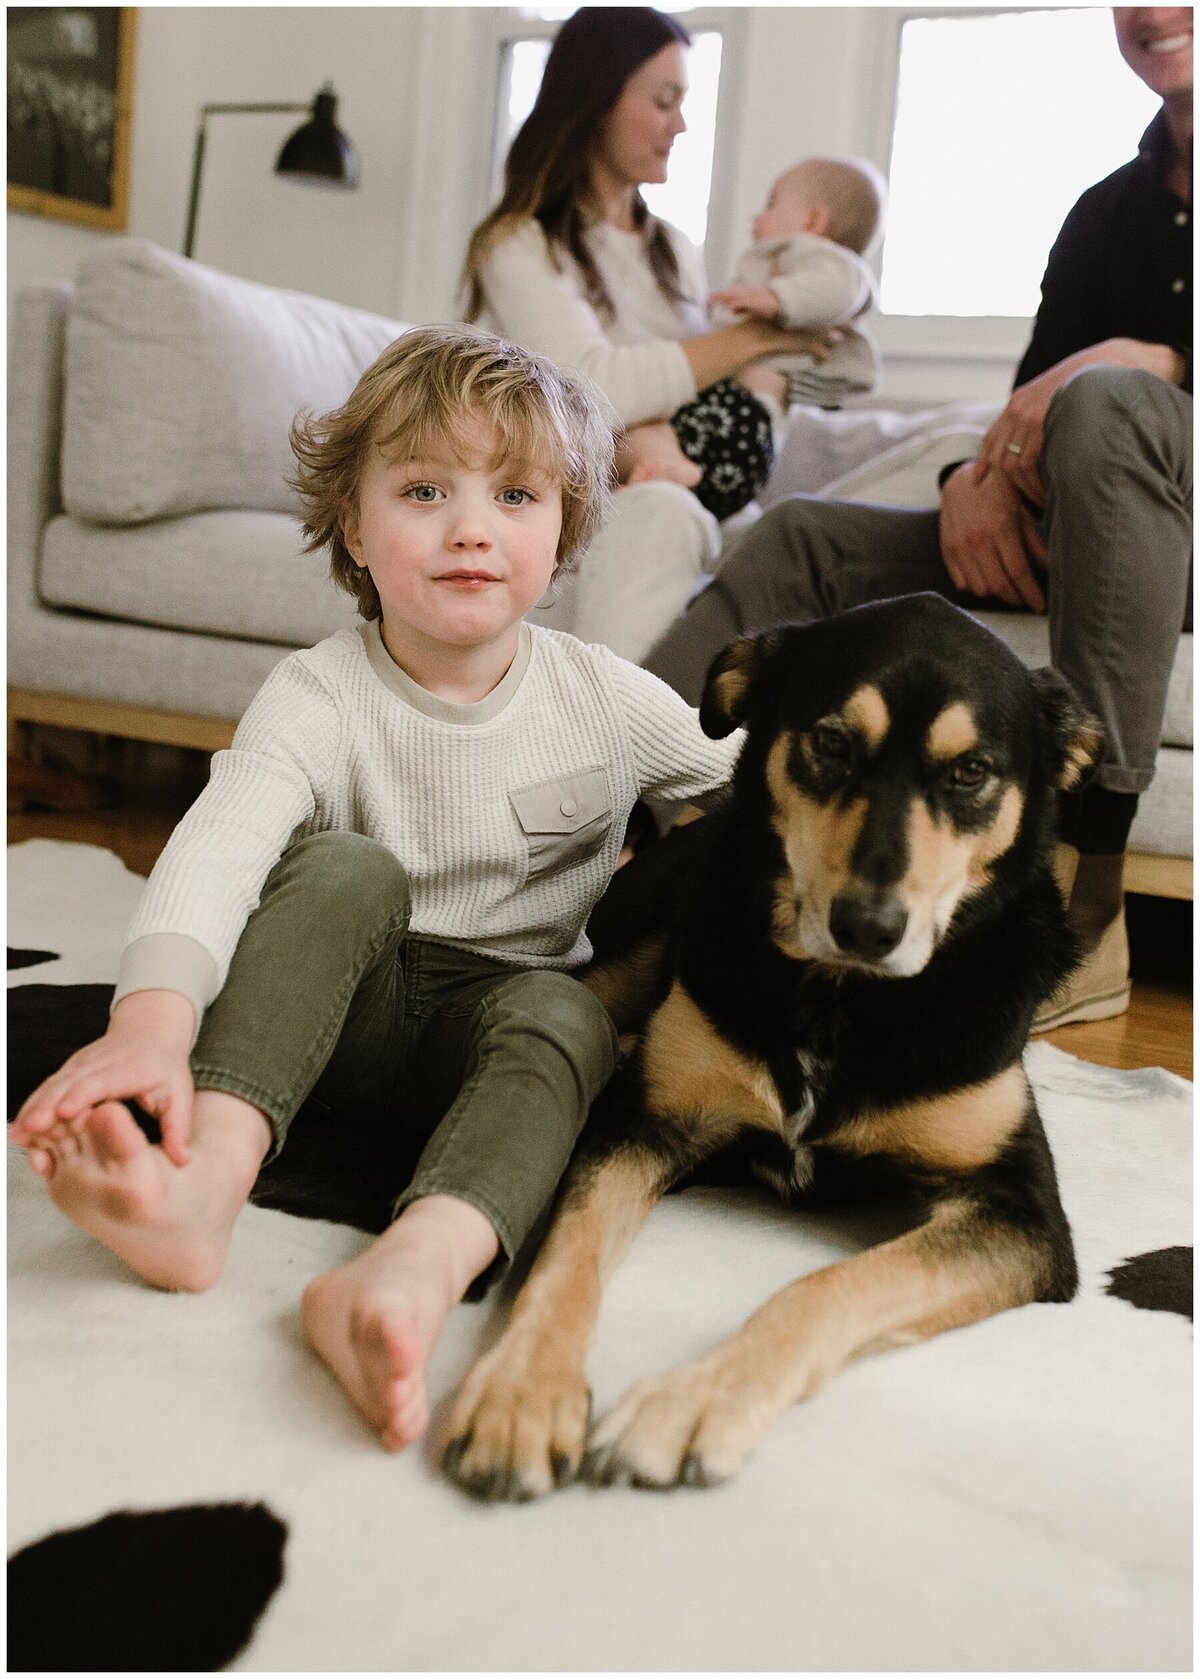 Child sitting on a rug next to dog with parents and baby in the background